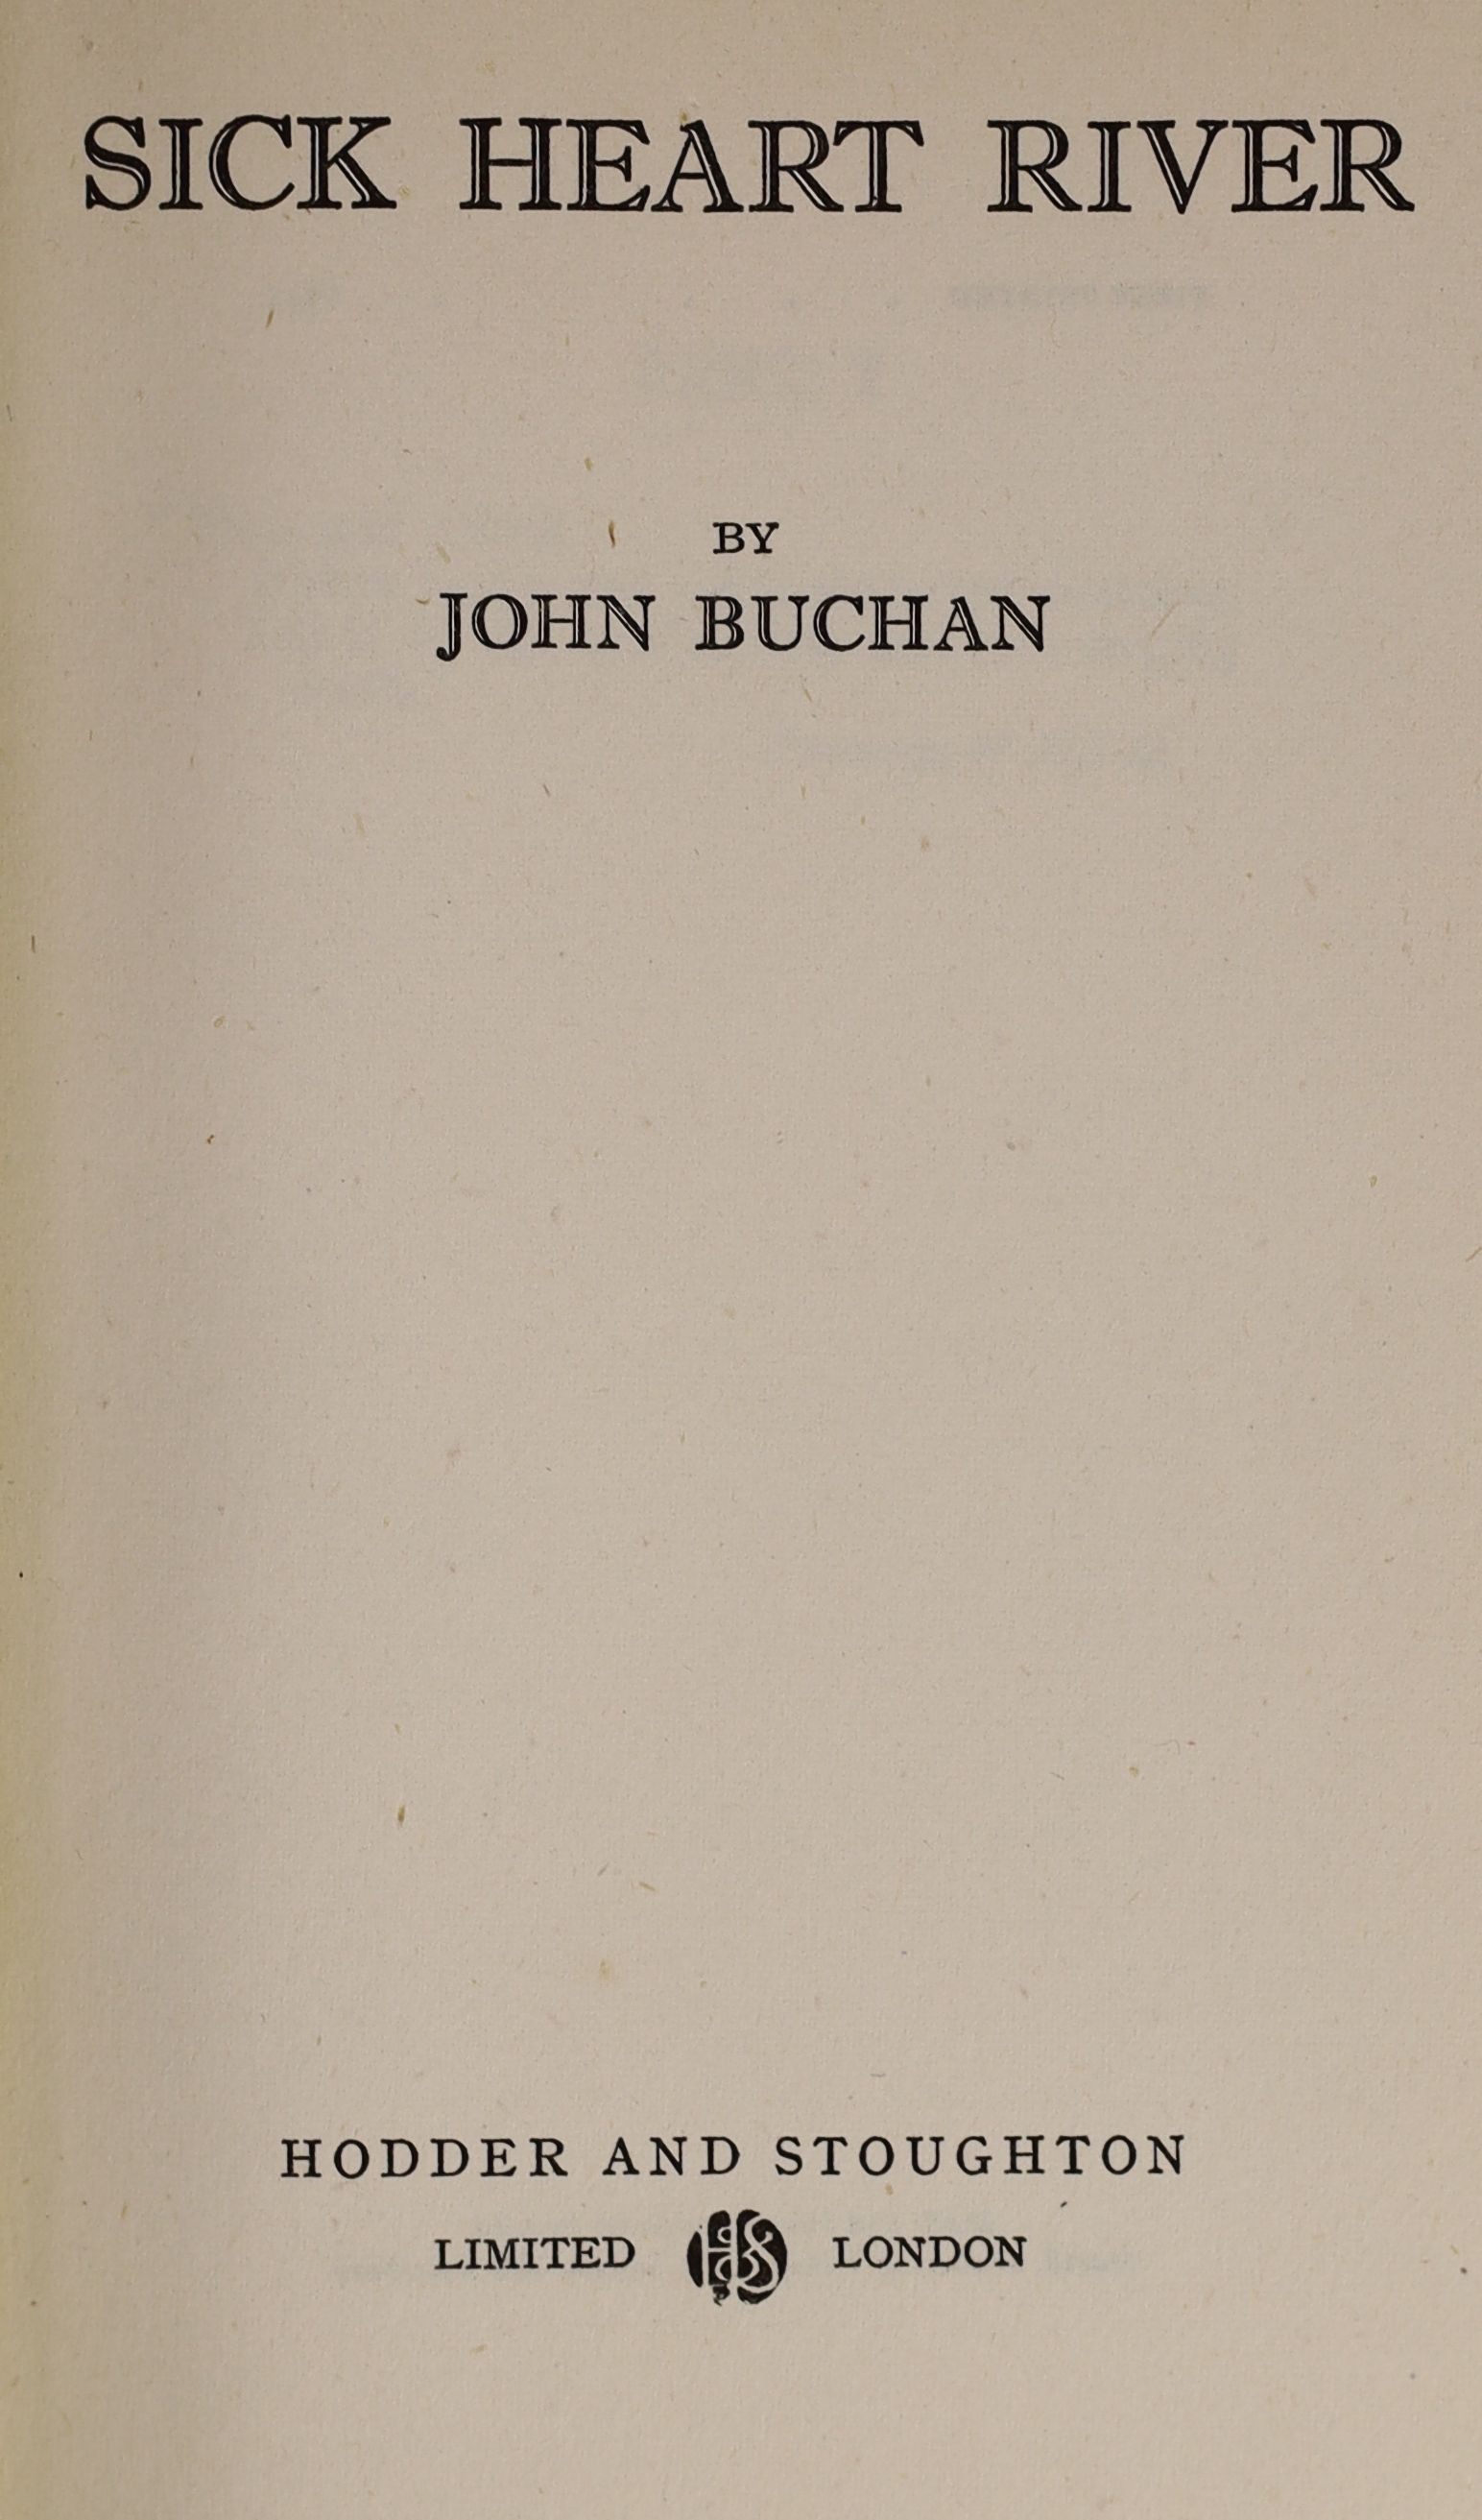 Buchan, John, 1st Baron Tweedsmuir - 2 works - The Thirty Nine Steps, 1st edition in book form, 8vo, original cloth, soiled with extremities worn, ownership stamps and pencil inscription, William Blackwood and Sons, Edin